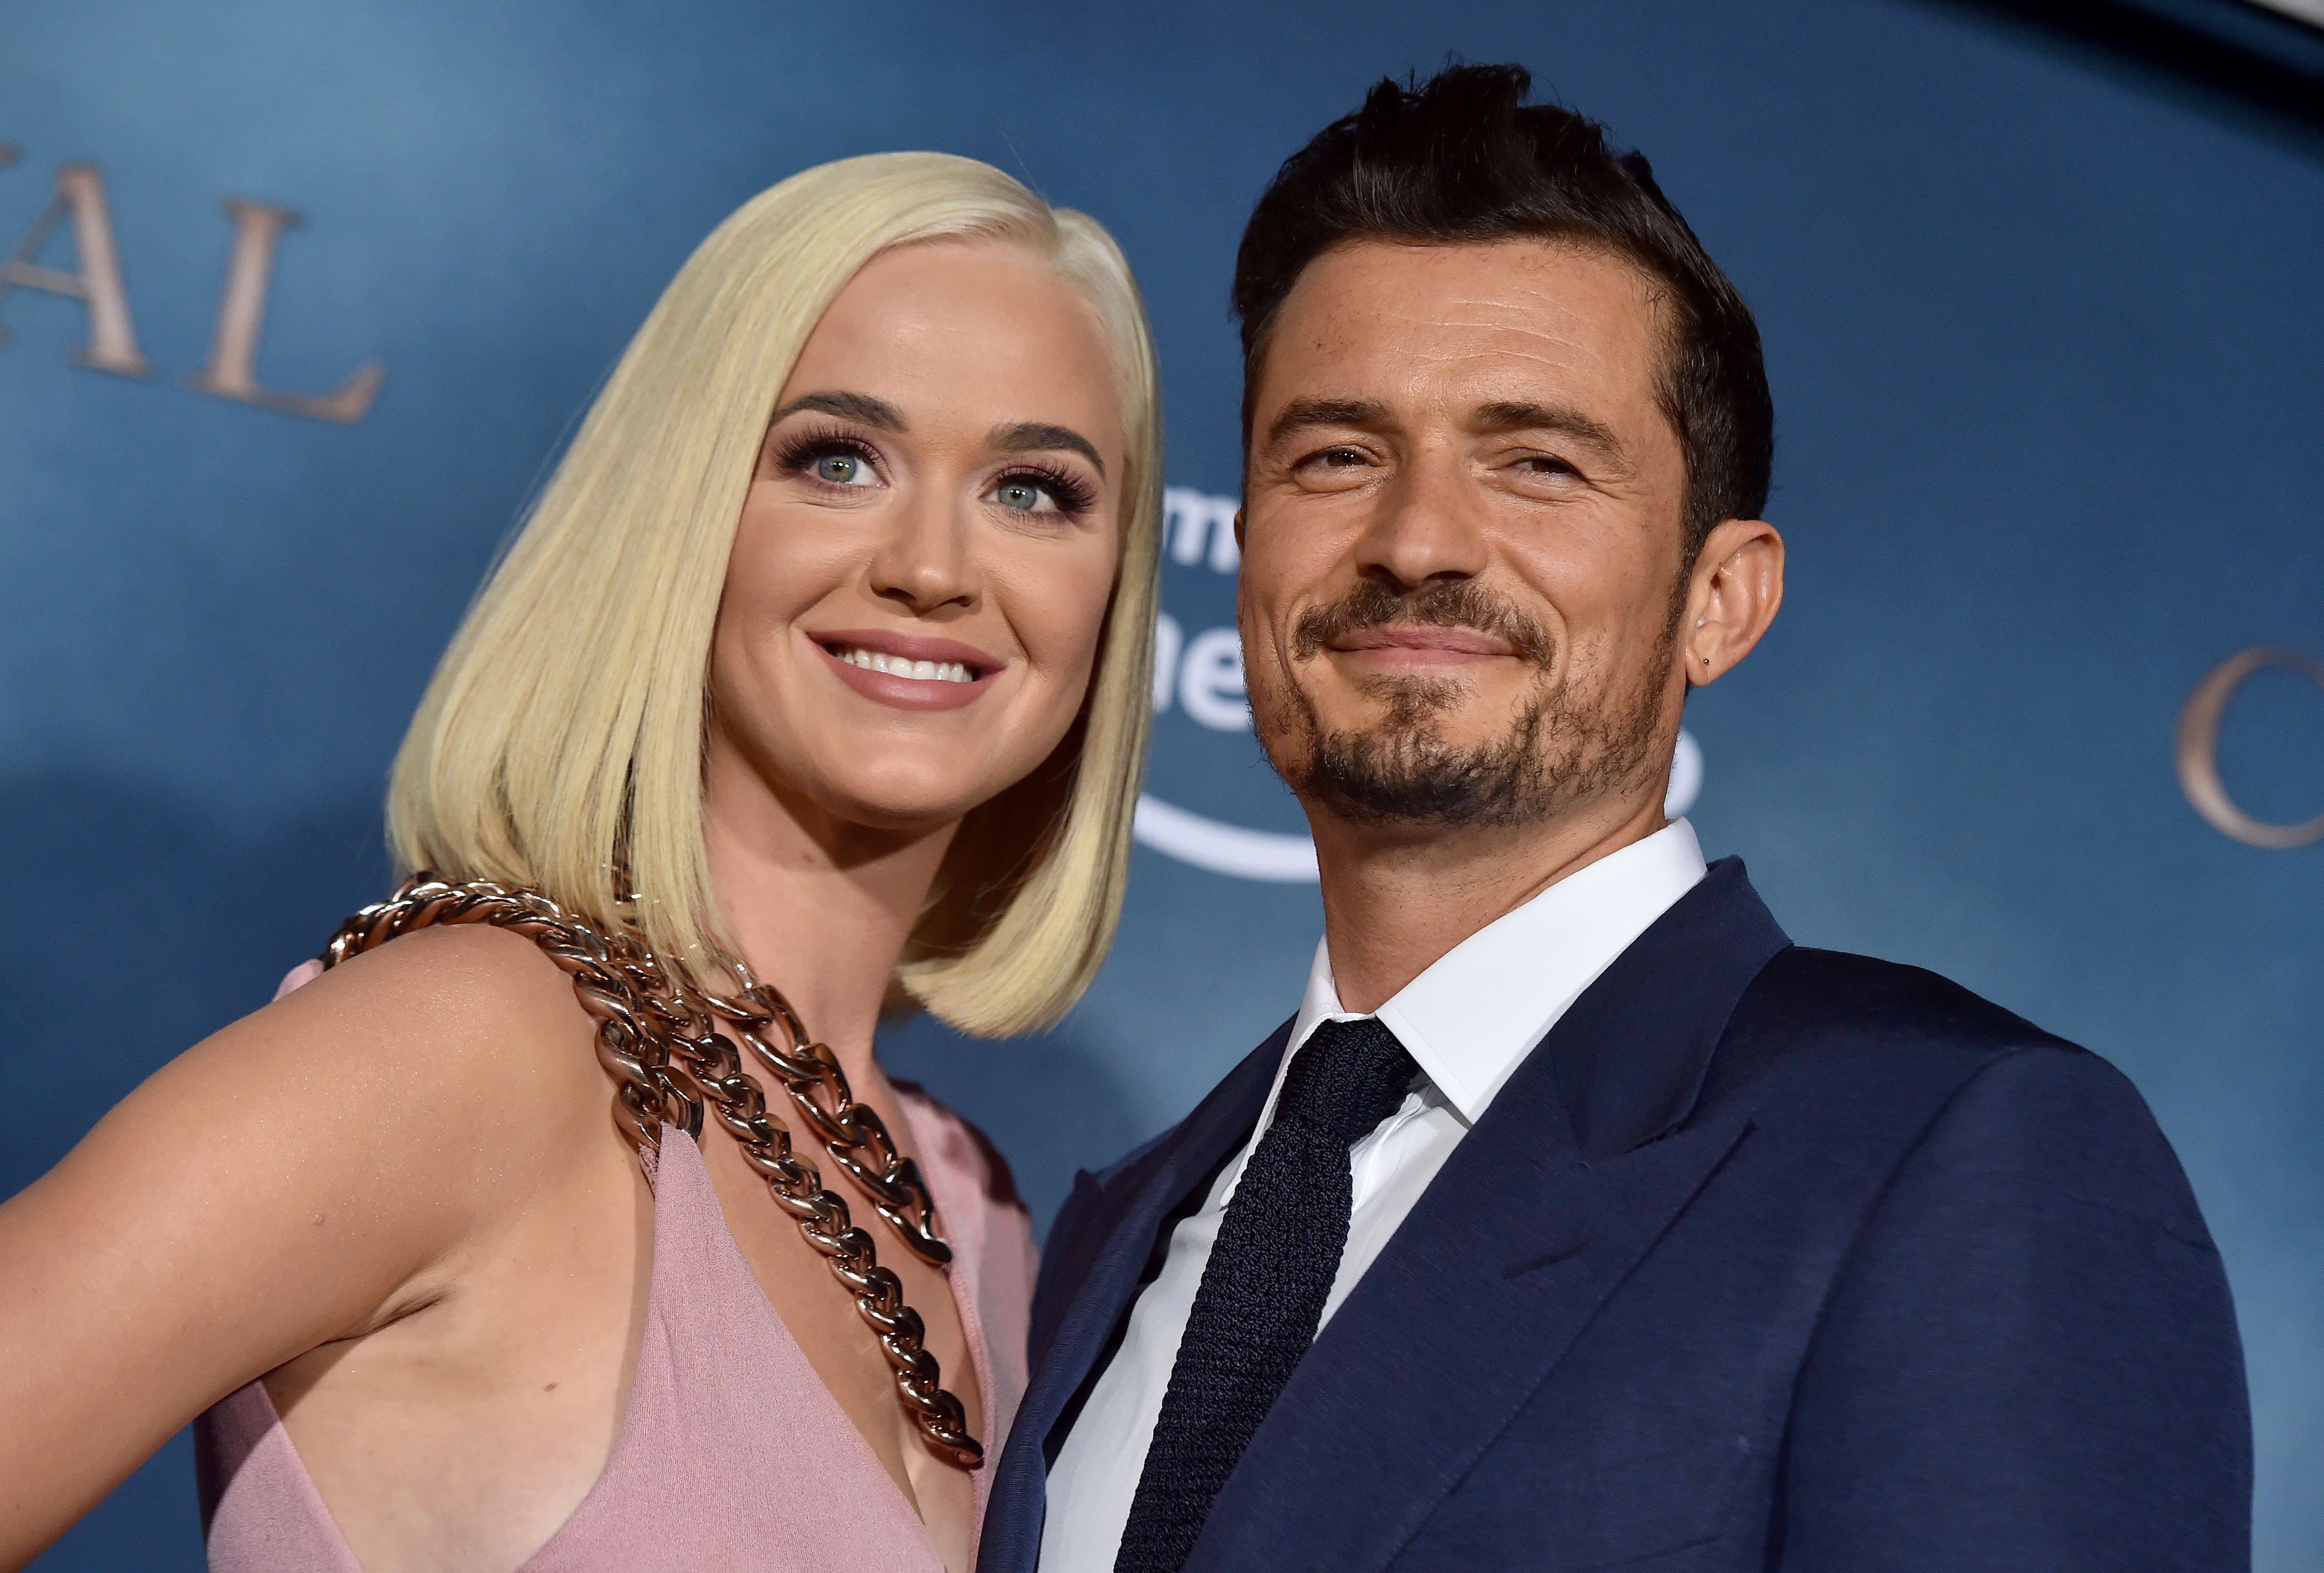 Katy Perry and Orlando Bloom Celebrate Her Final American Idol Episode With a Mismatched Date Night